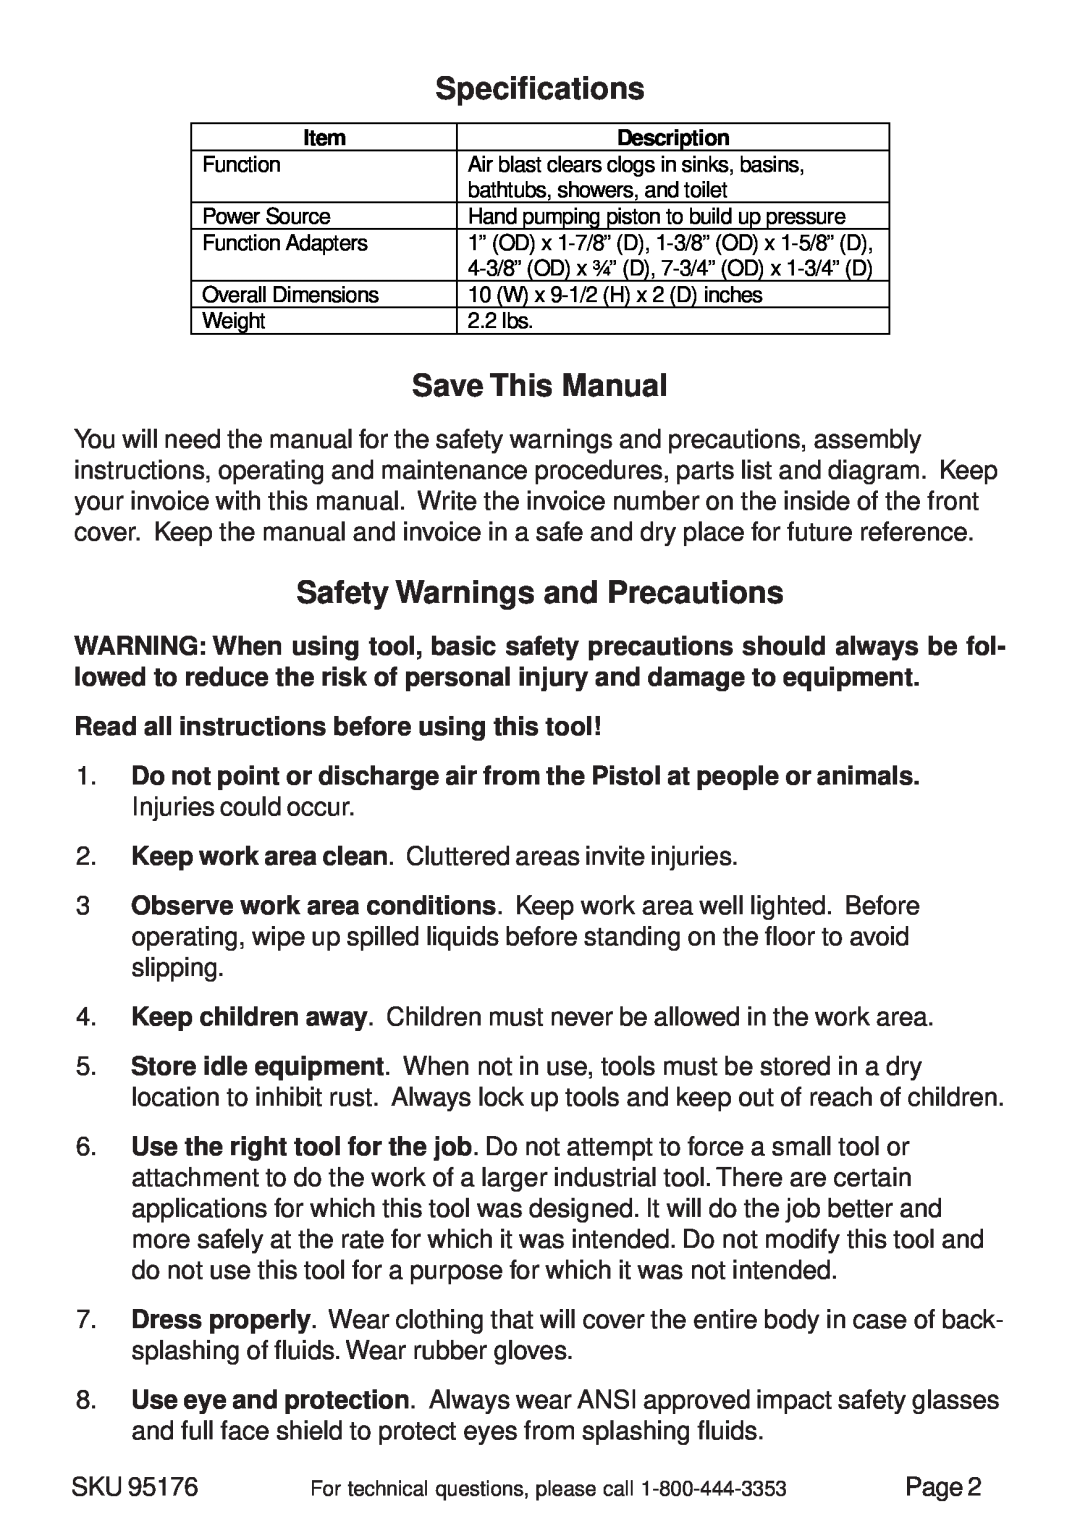 Harbor Freight Tools 95176 manual Specifications, Save This Manual, Safety Warnings and Precautions 